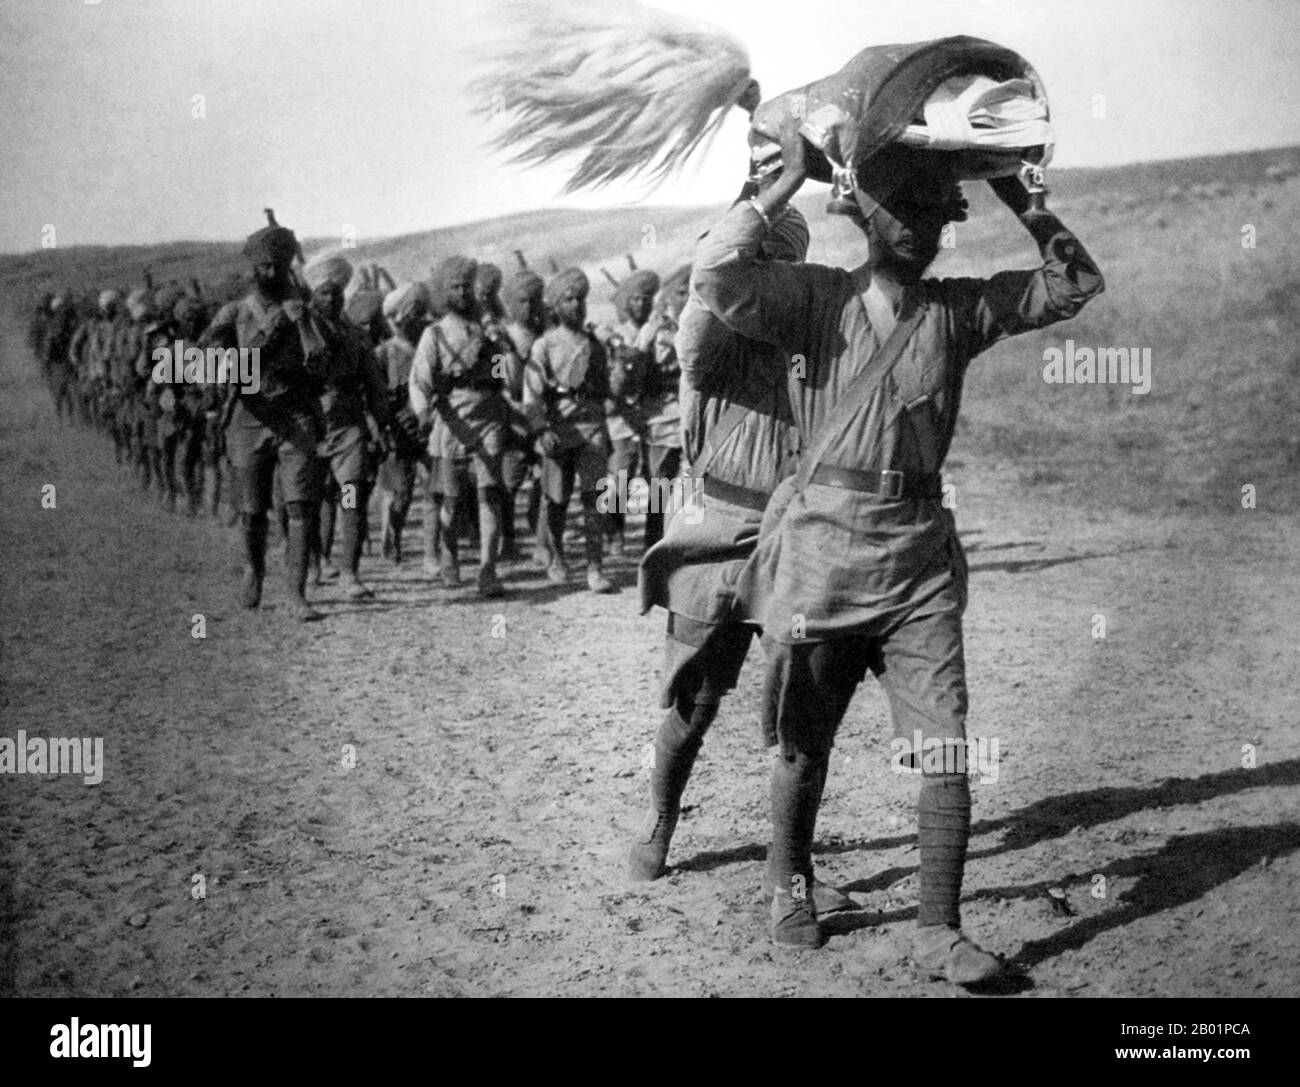 Iran: Sikh soldiers of the British Indian Army marching to their religious services in present-day Iran, 1918.  The Middle Eastern theatre of World War I was the scene of action between 29 October 1914, and 30 October 1918. The combatants were the Ottoman Empire, with some assistance from the other Central Powers, and primarily the British and the Russians among the Allies of World War I. There were five main campaigns: the Sinai and Palestine Campaign, the Mesopotamian Campaign, the Caucasus Campaign, the Persian Campaign and the Gallipoli Campaign. Stock Photo